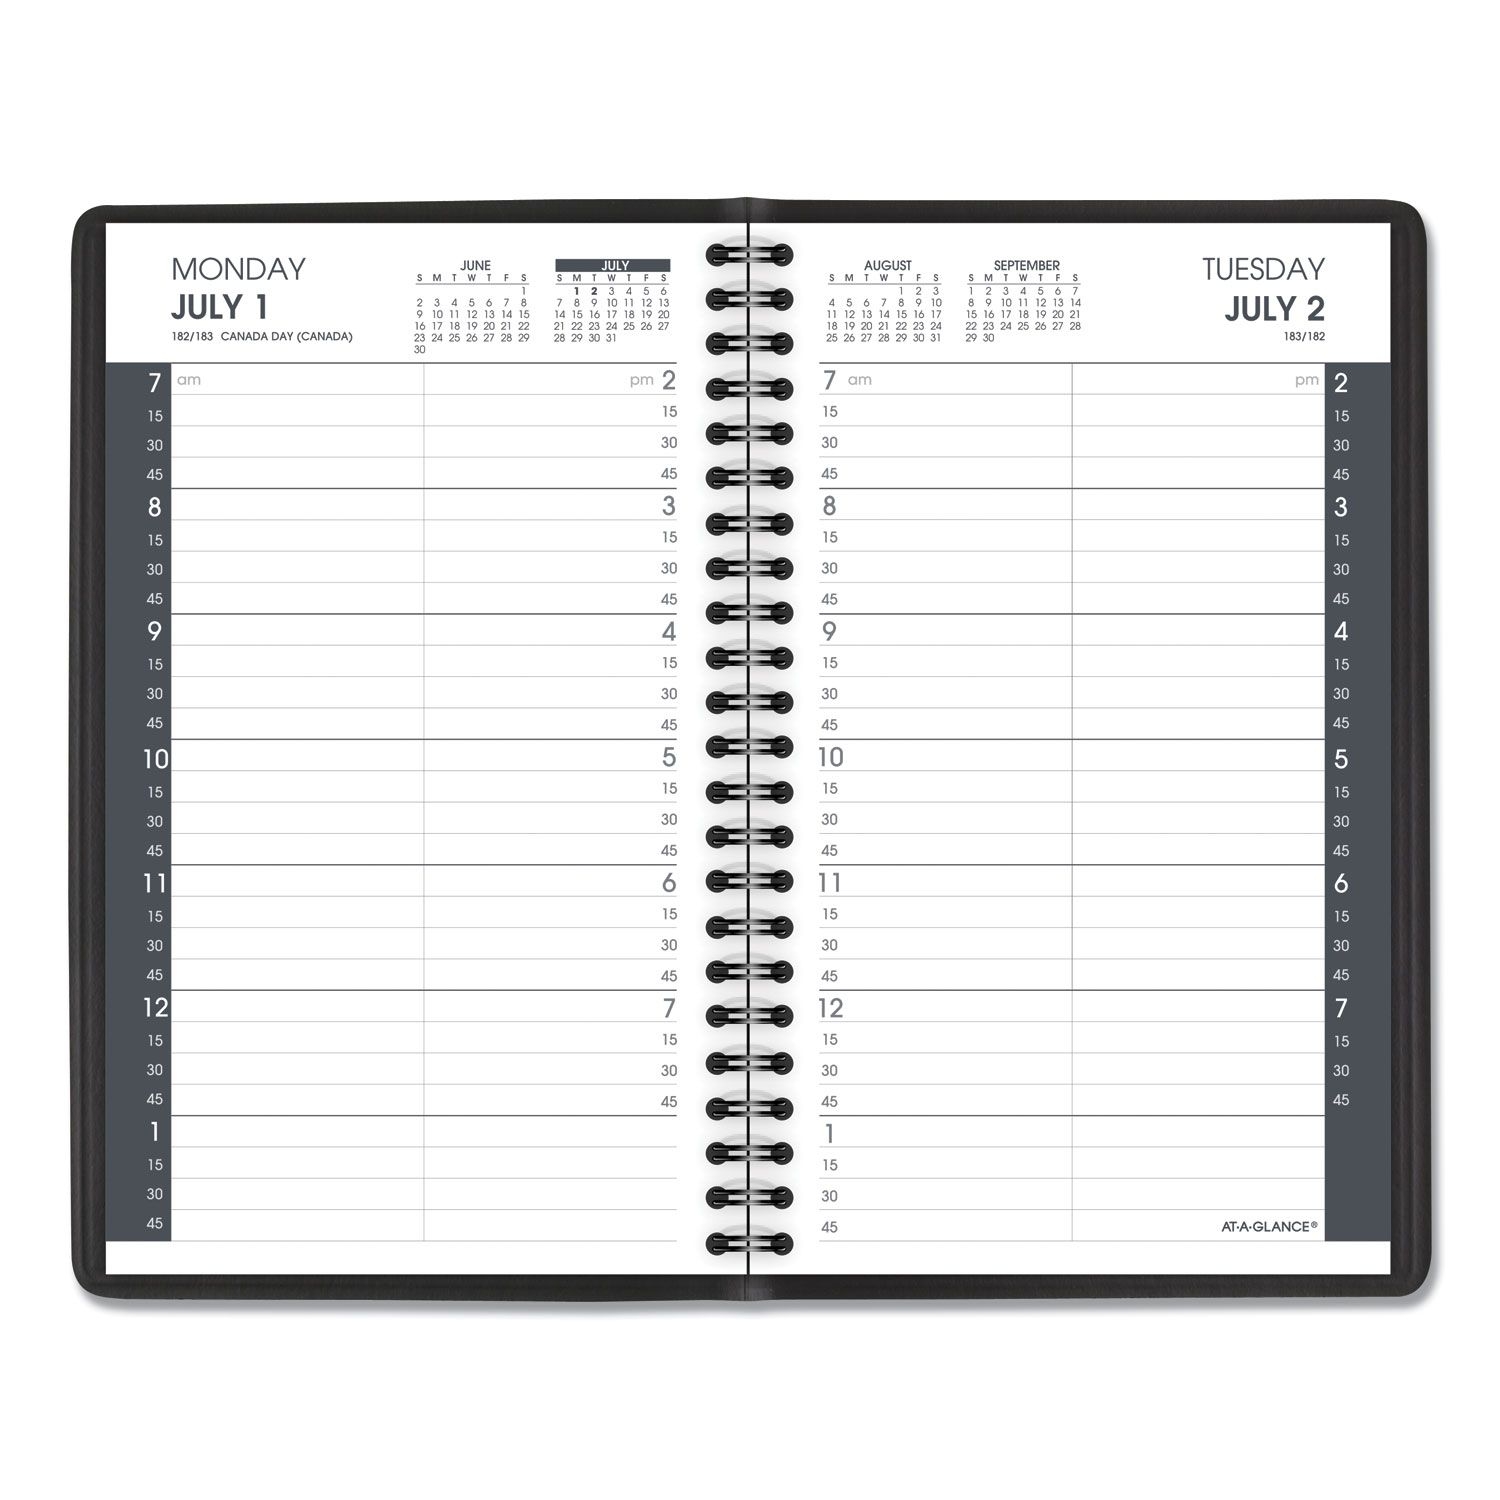 daily appointment book with 15 minute appointments, 8 x 4